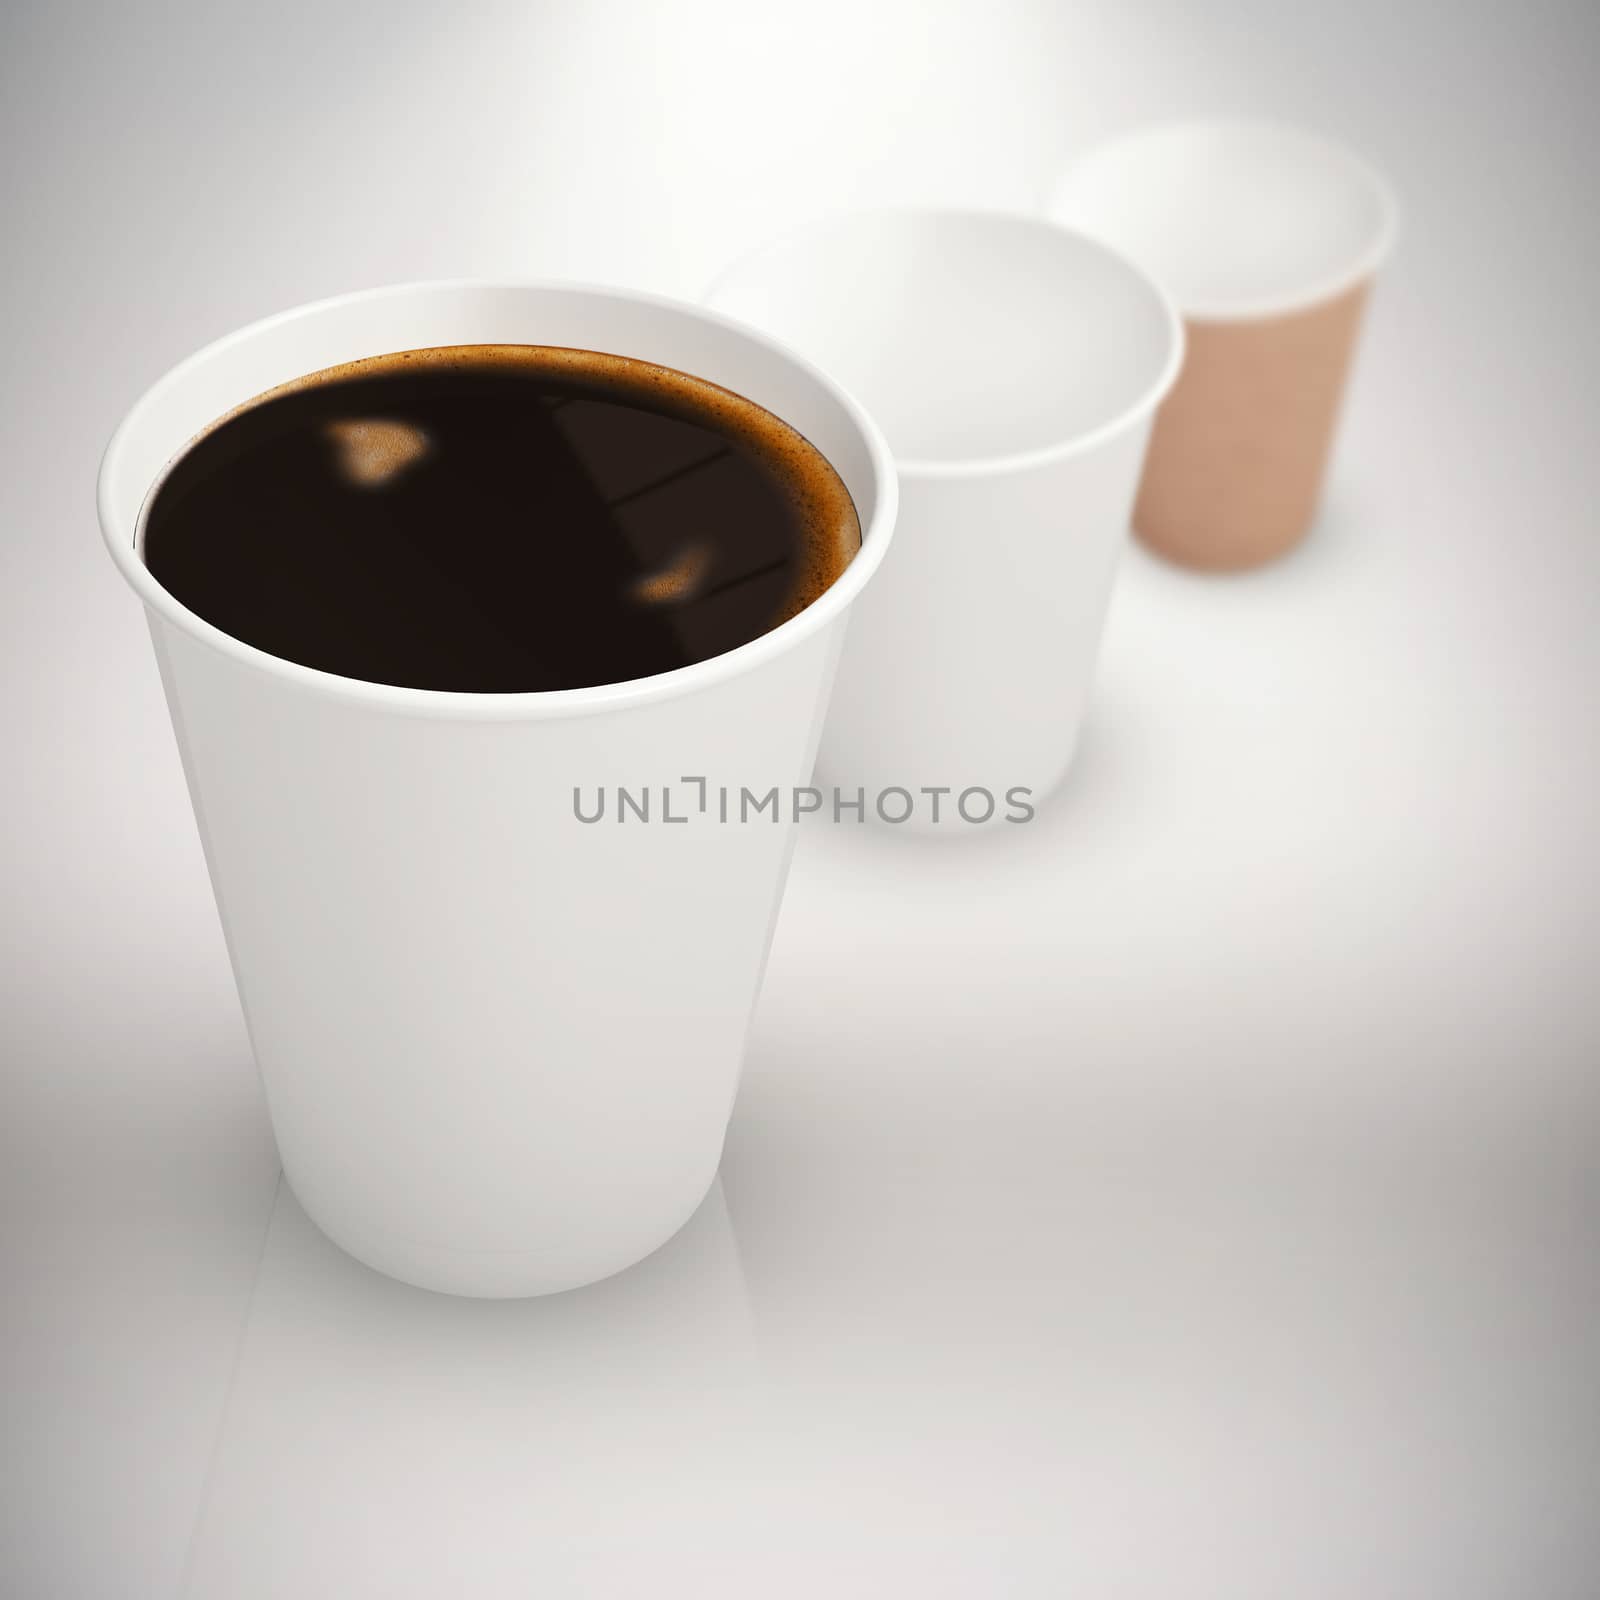 Coffee cup over white background against grey background